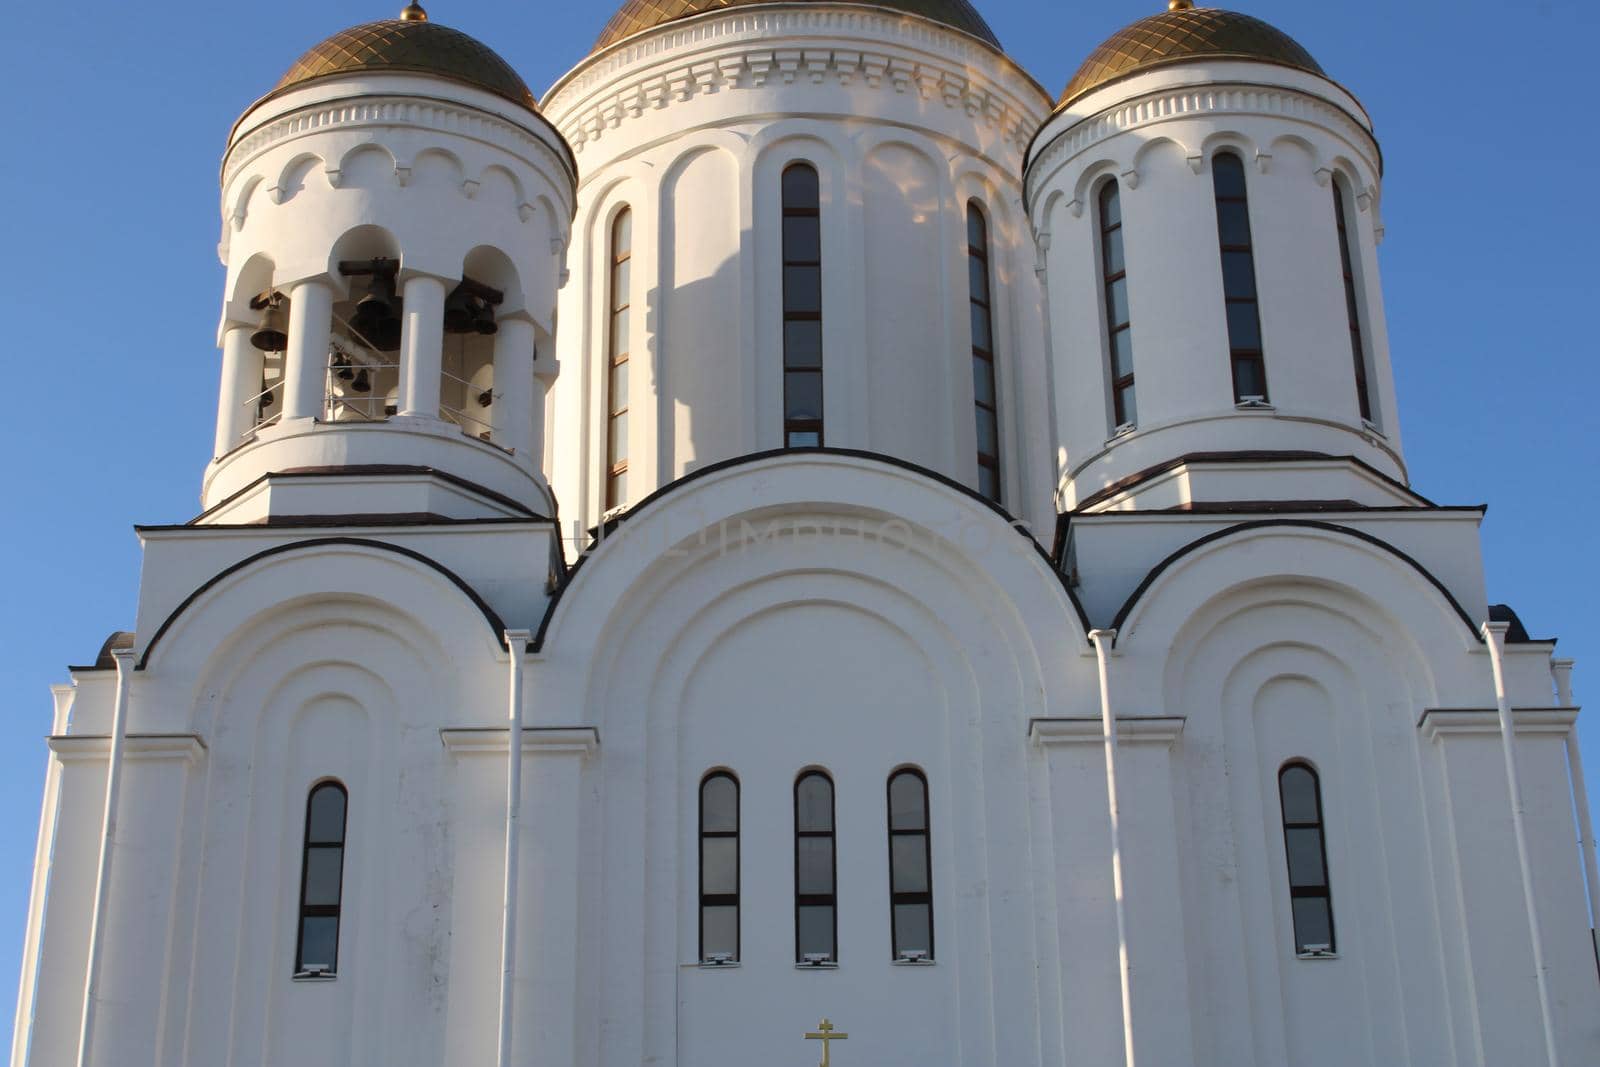 The church is made of white stone. Religion. Orthodoxy. Architecture. High quality photo